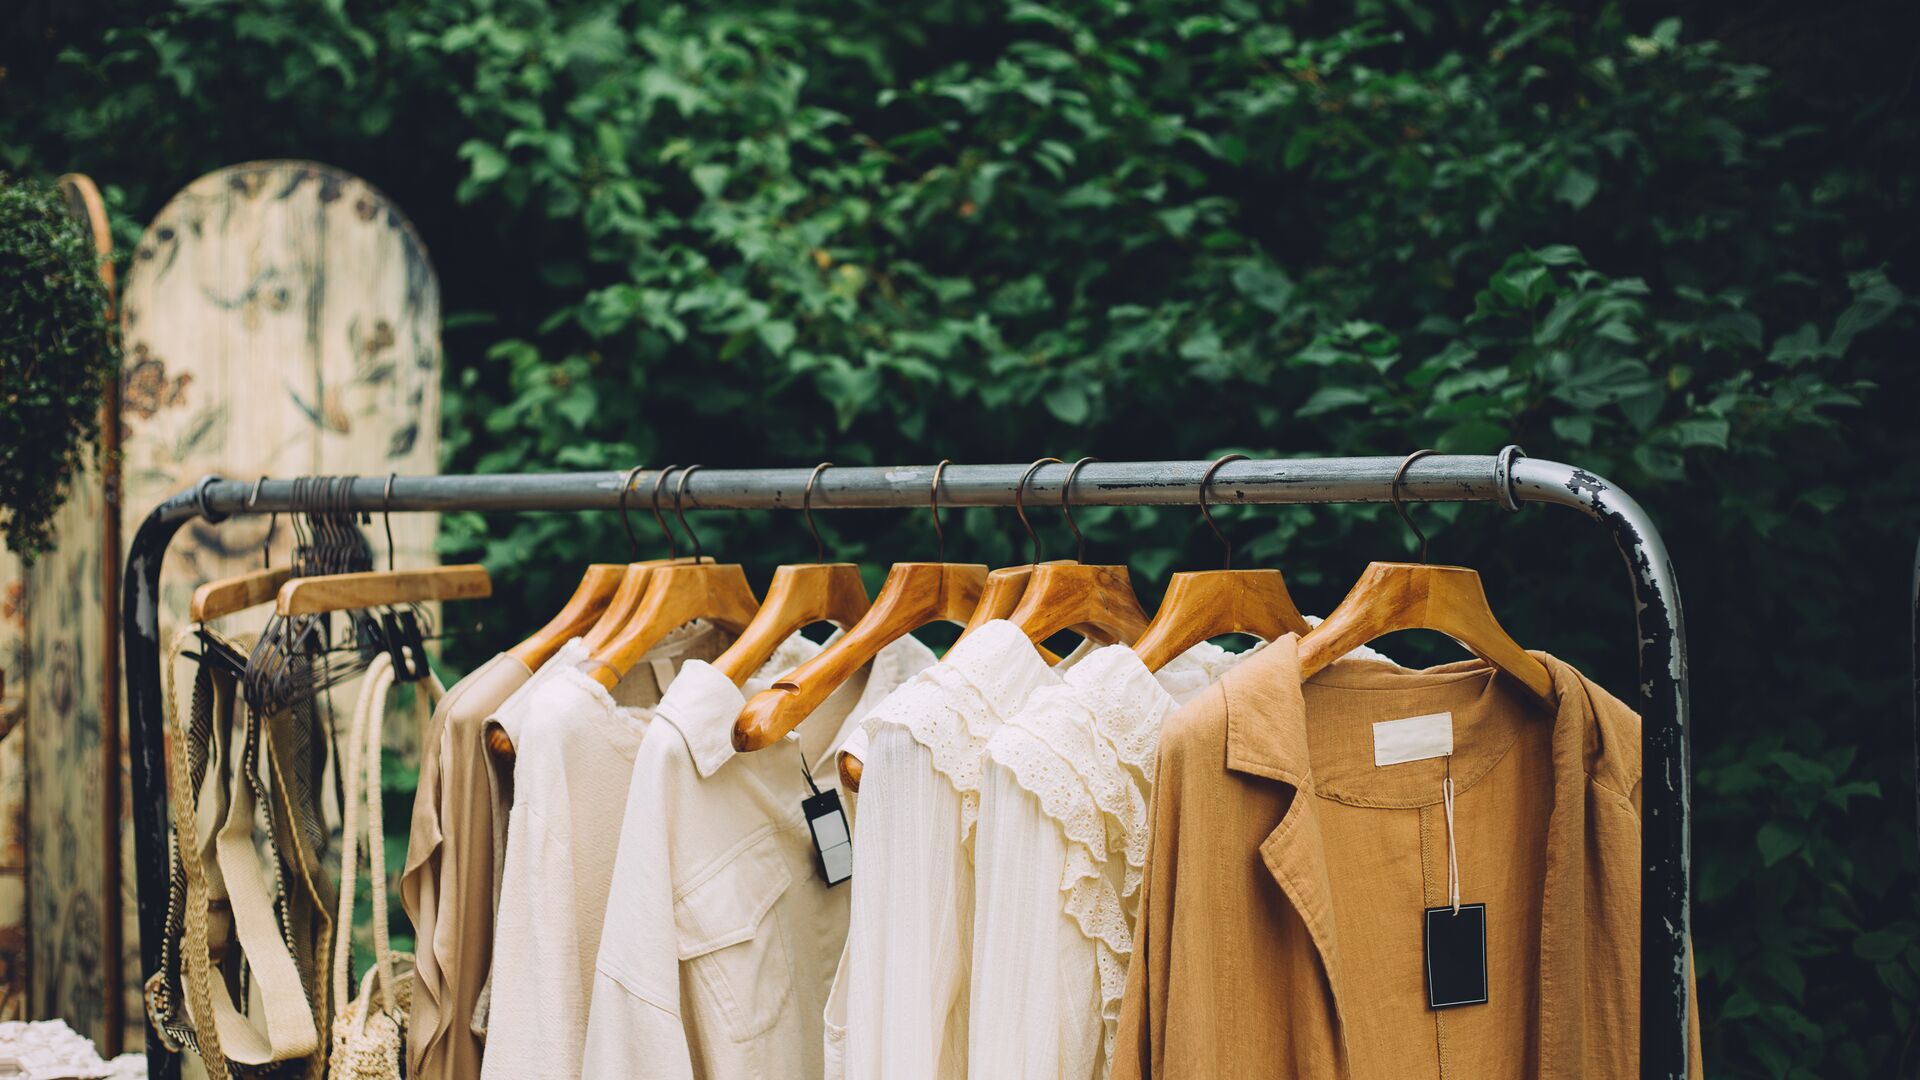 Sustainable wardrobe concept, sustainable fashion, clothing rack outdoors with dresses in the woods. Cuyana's CEO Karla Gallardo joins Cowen Insights to discuss sustainable fashion, responsible material sourcing & educating the consumer.